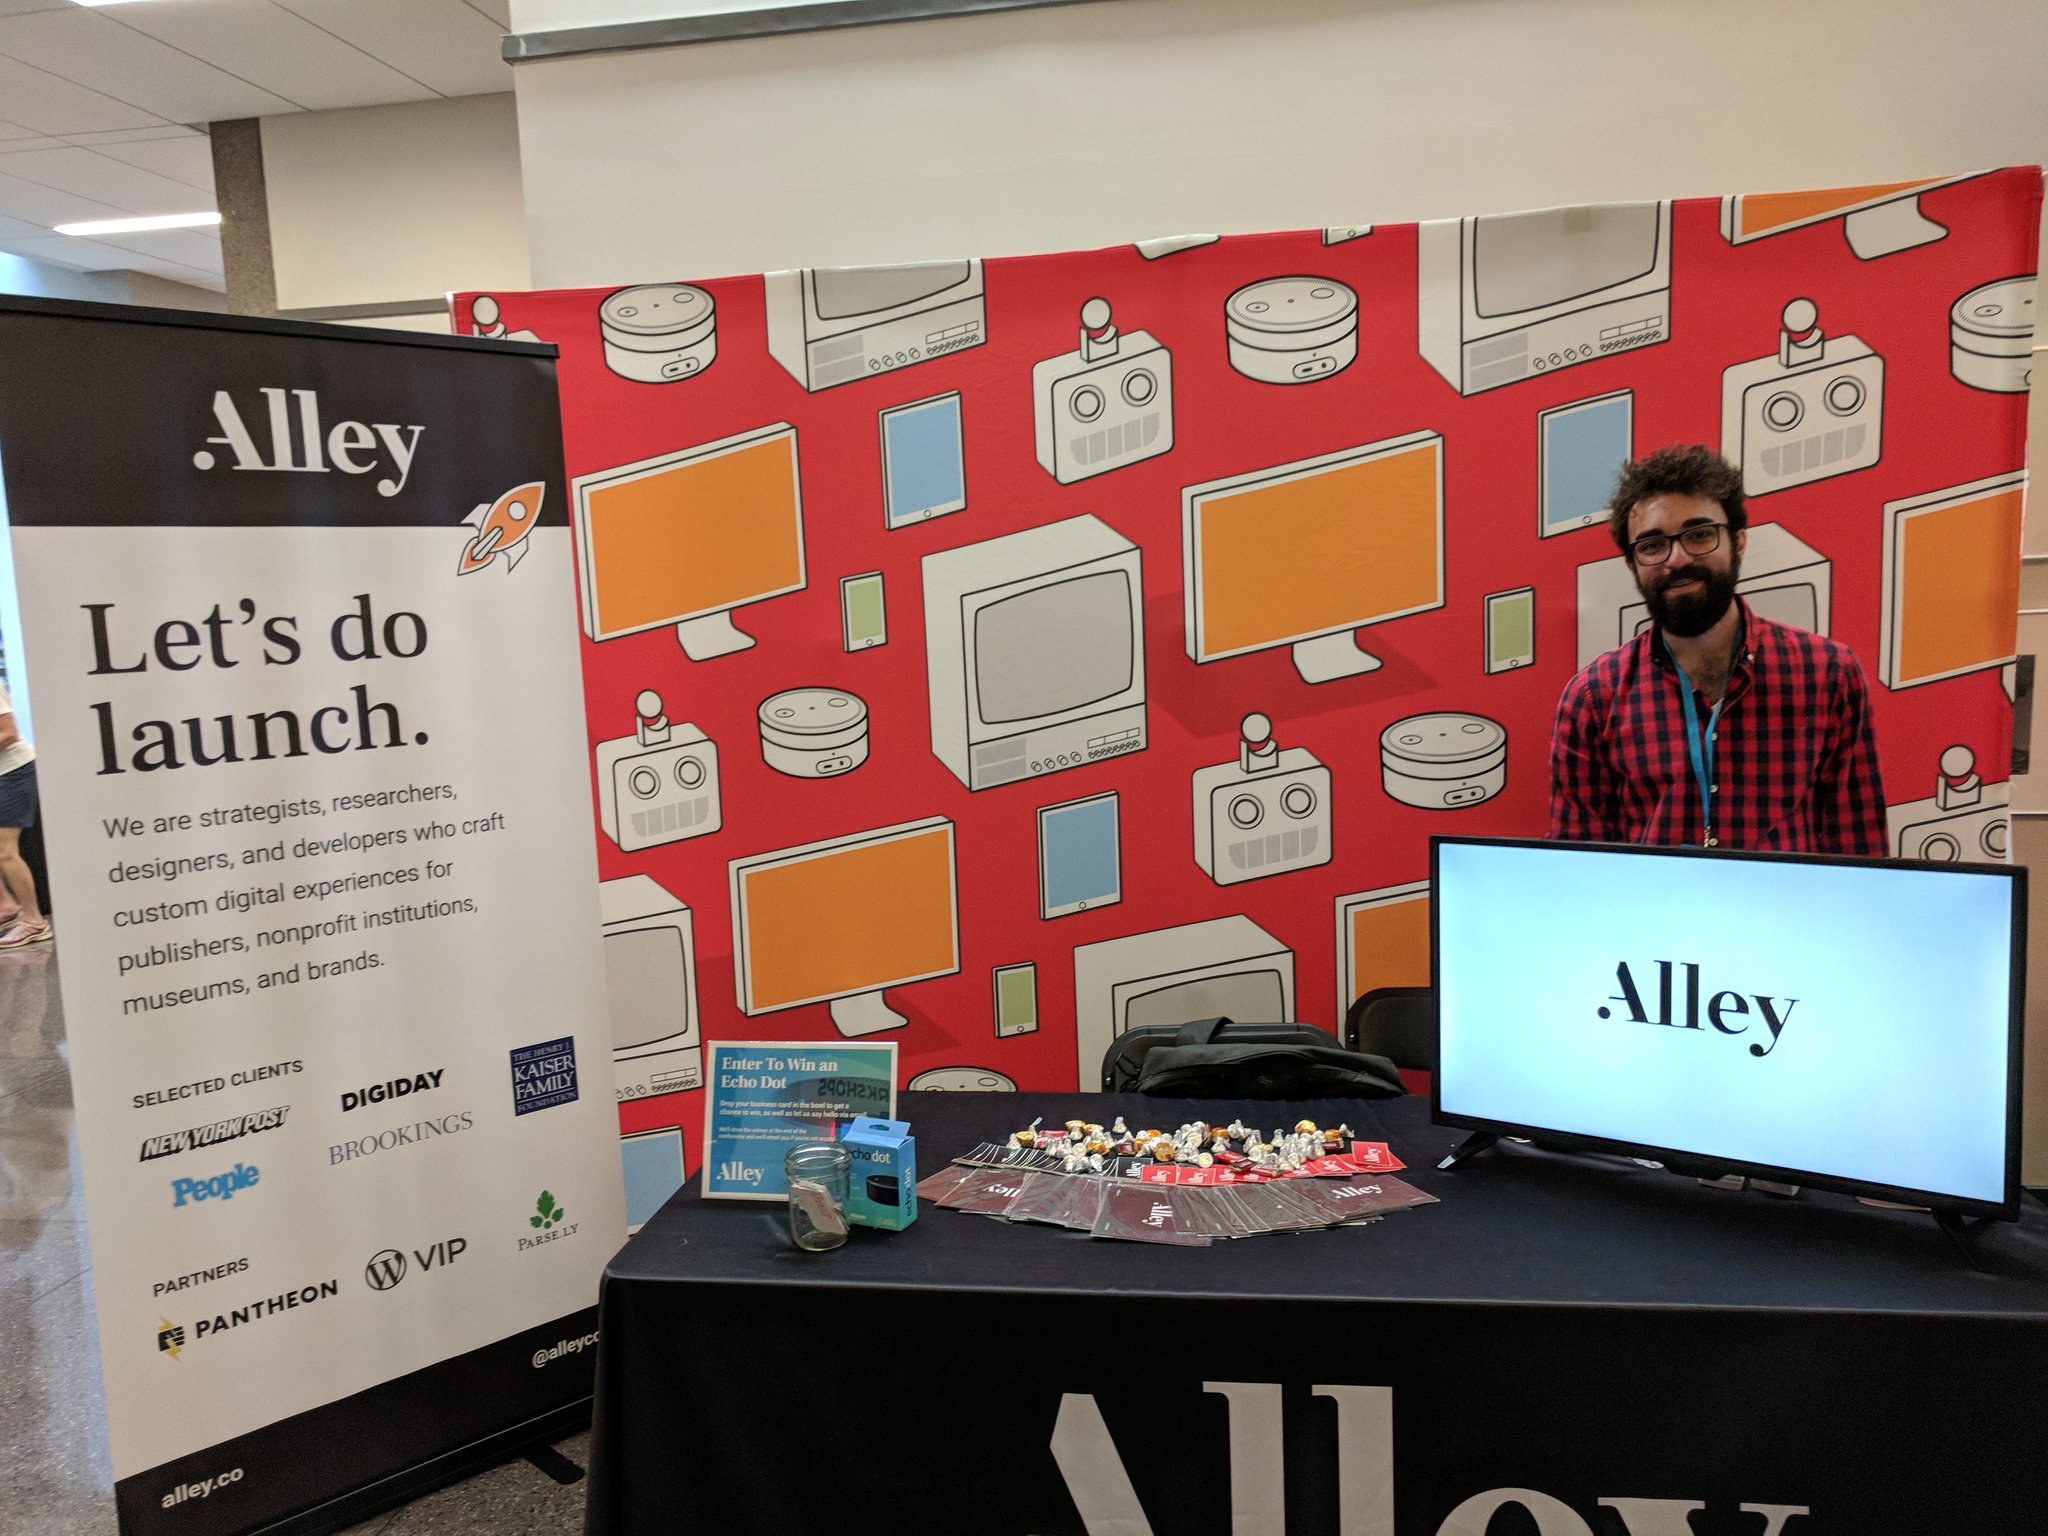 The Alley conference booth with a red  background with computers and tech devices, a television screen with the Alley logo, and a banner, as well as a White man in a plaid shirt smiling at the camera